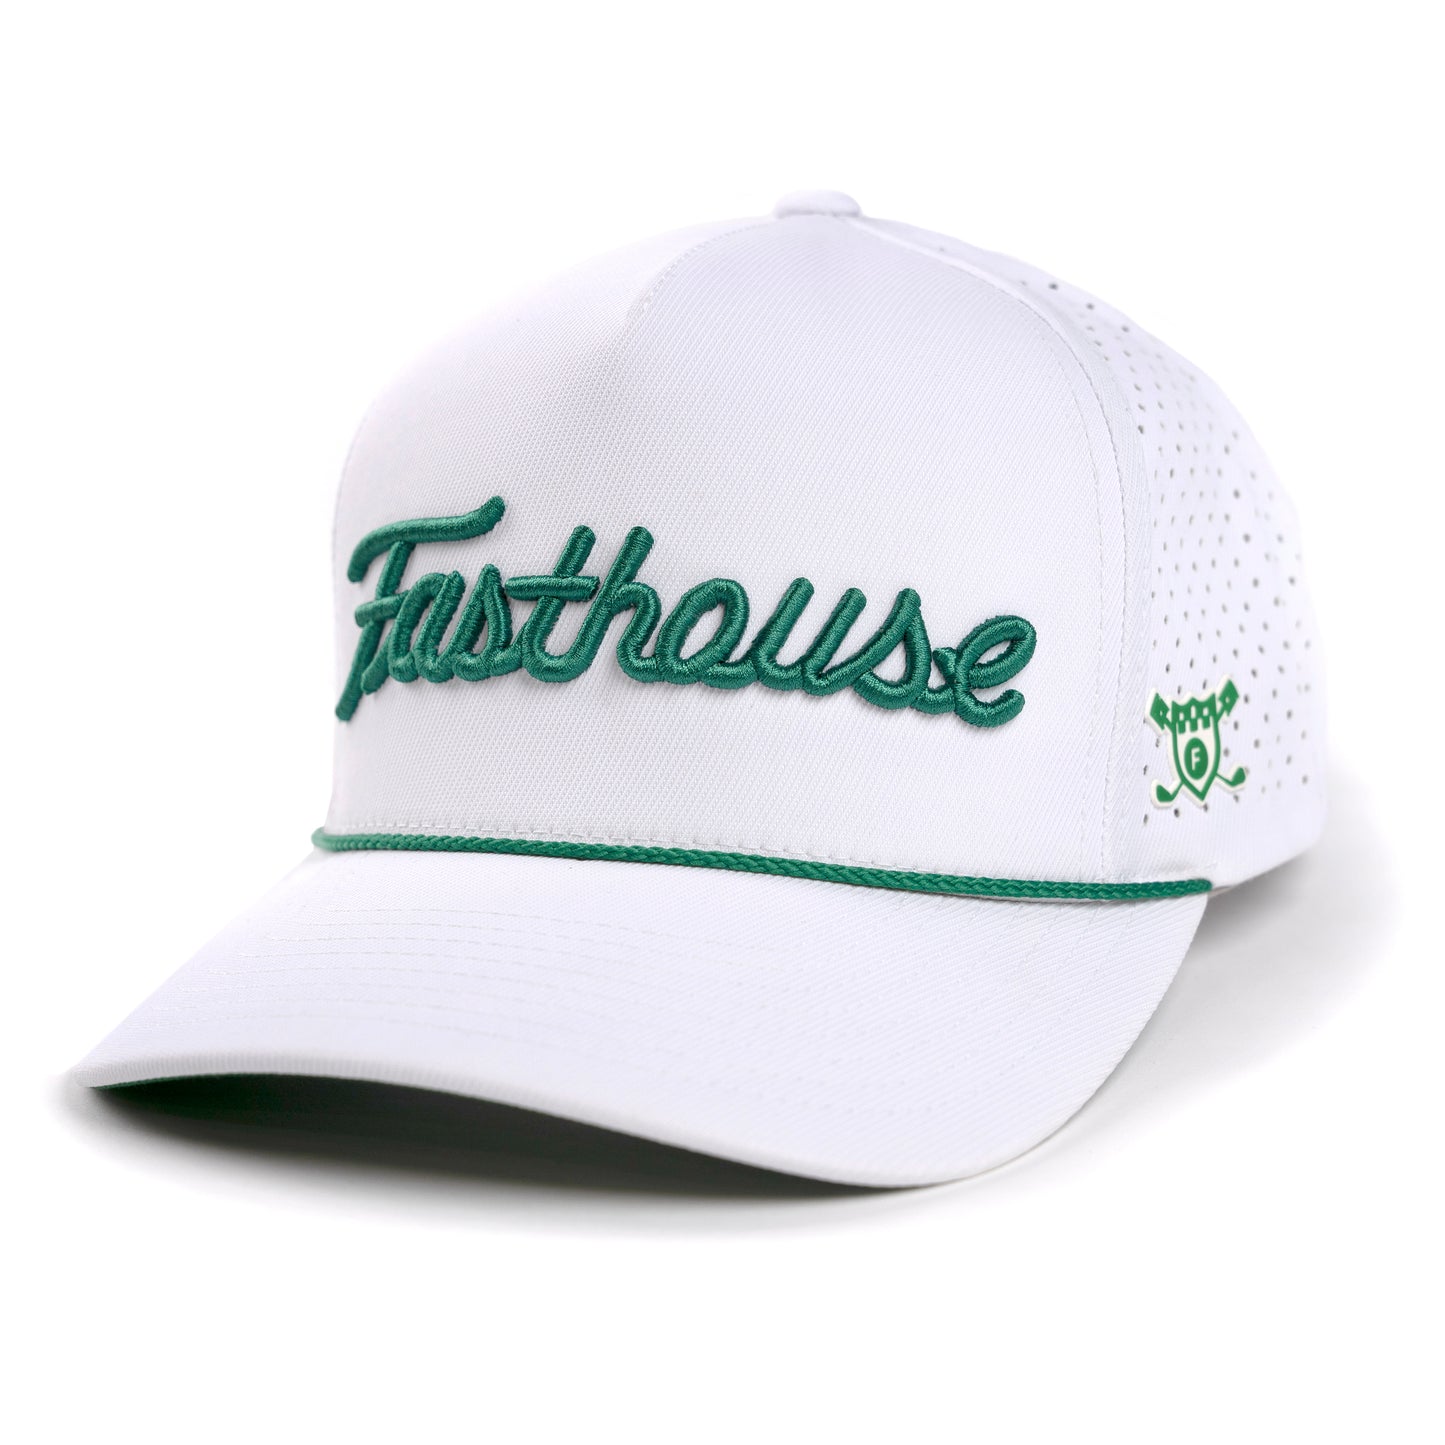 FASTHOUSE EAGLE HAT